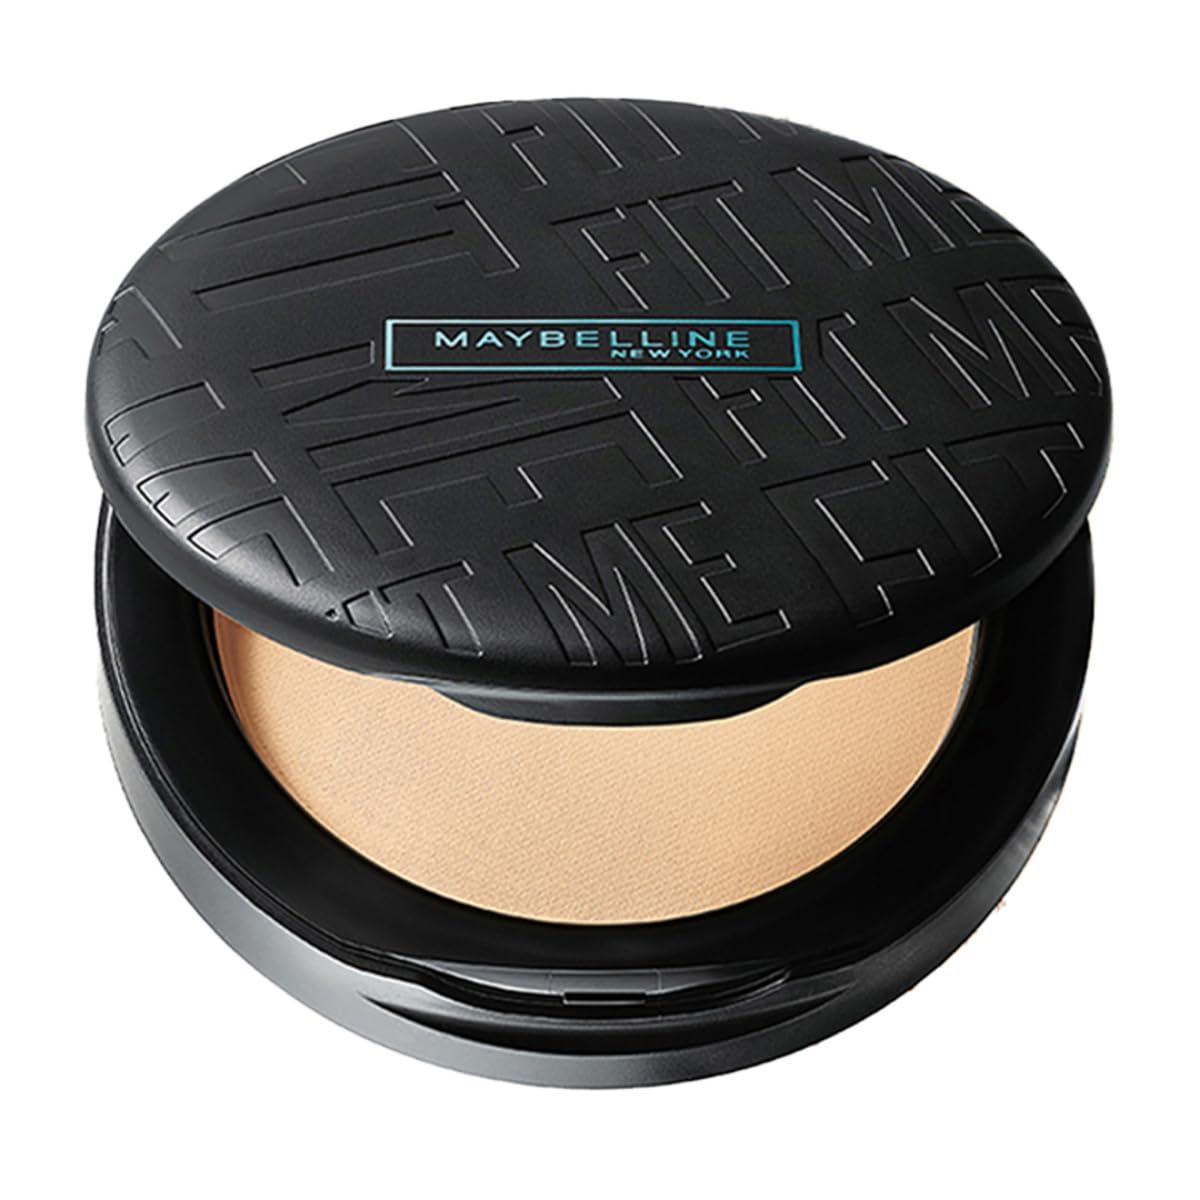 maybelline new york fit me matte + poreless compact powder, 16h oil control with spf 32, matte finish, 128 warm nude, 6g